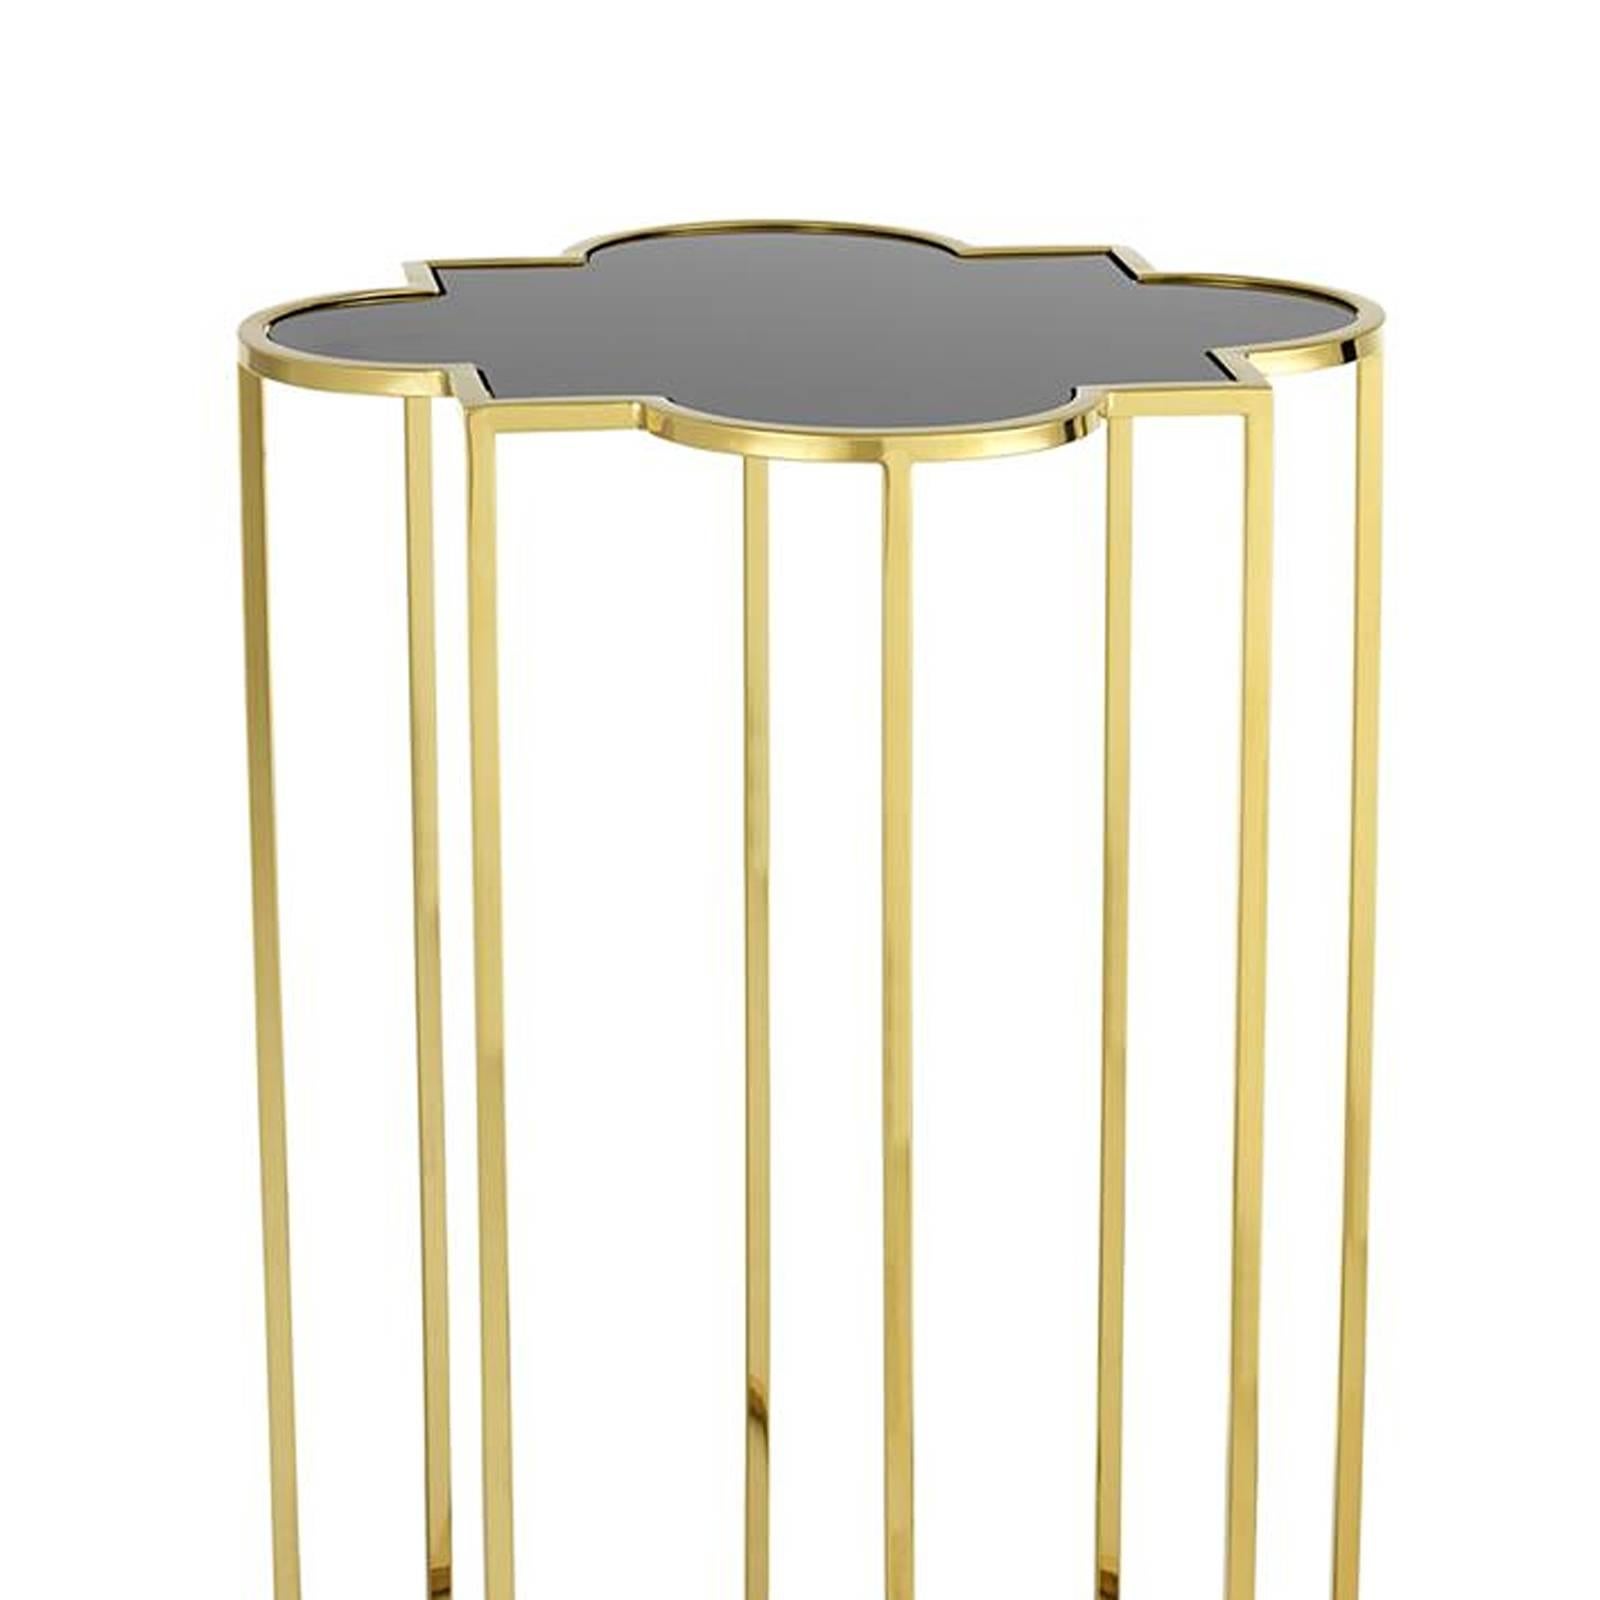 Chinese Clover Side Table Set of Two in Gold Finish